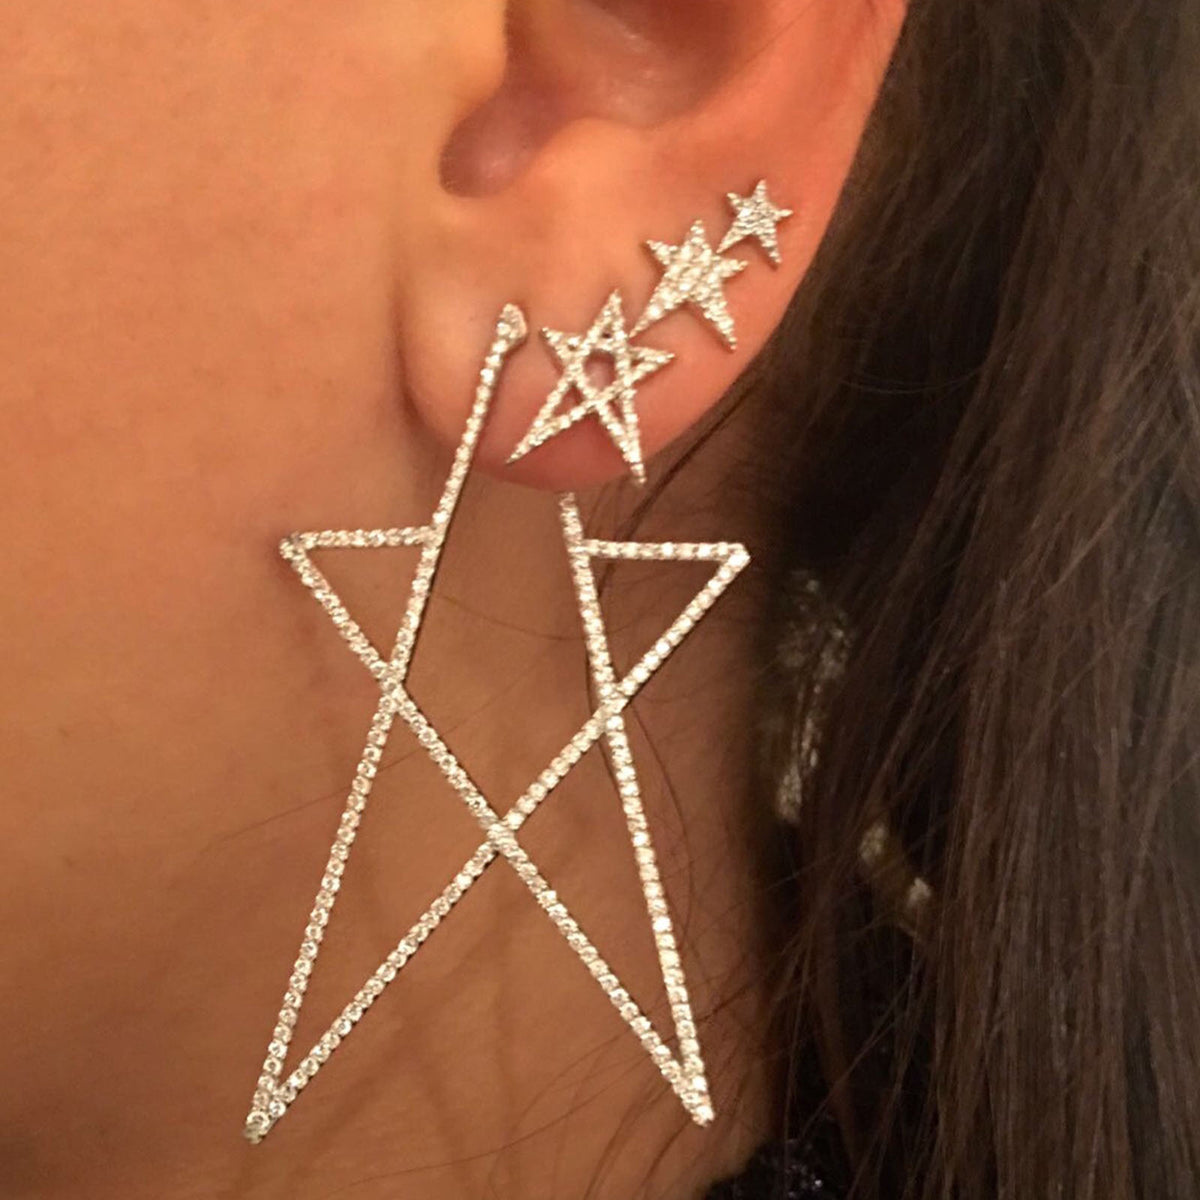 Maxi Pave Struck Star Stud Earring